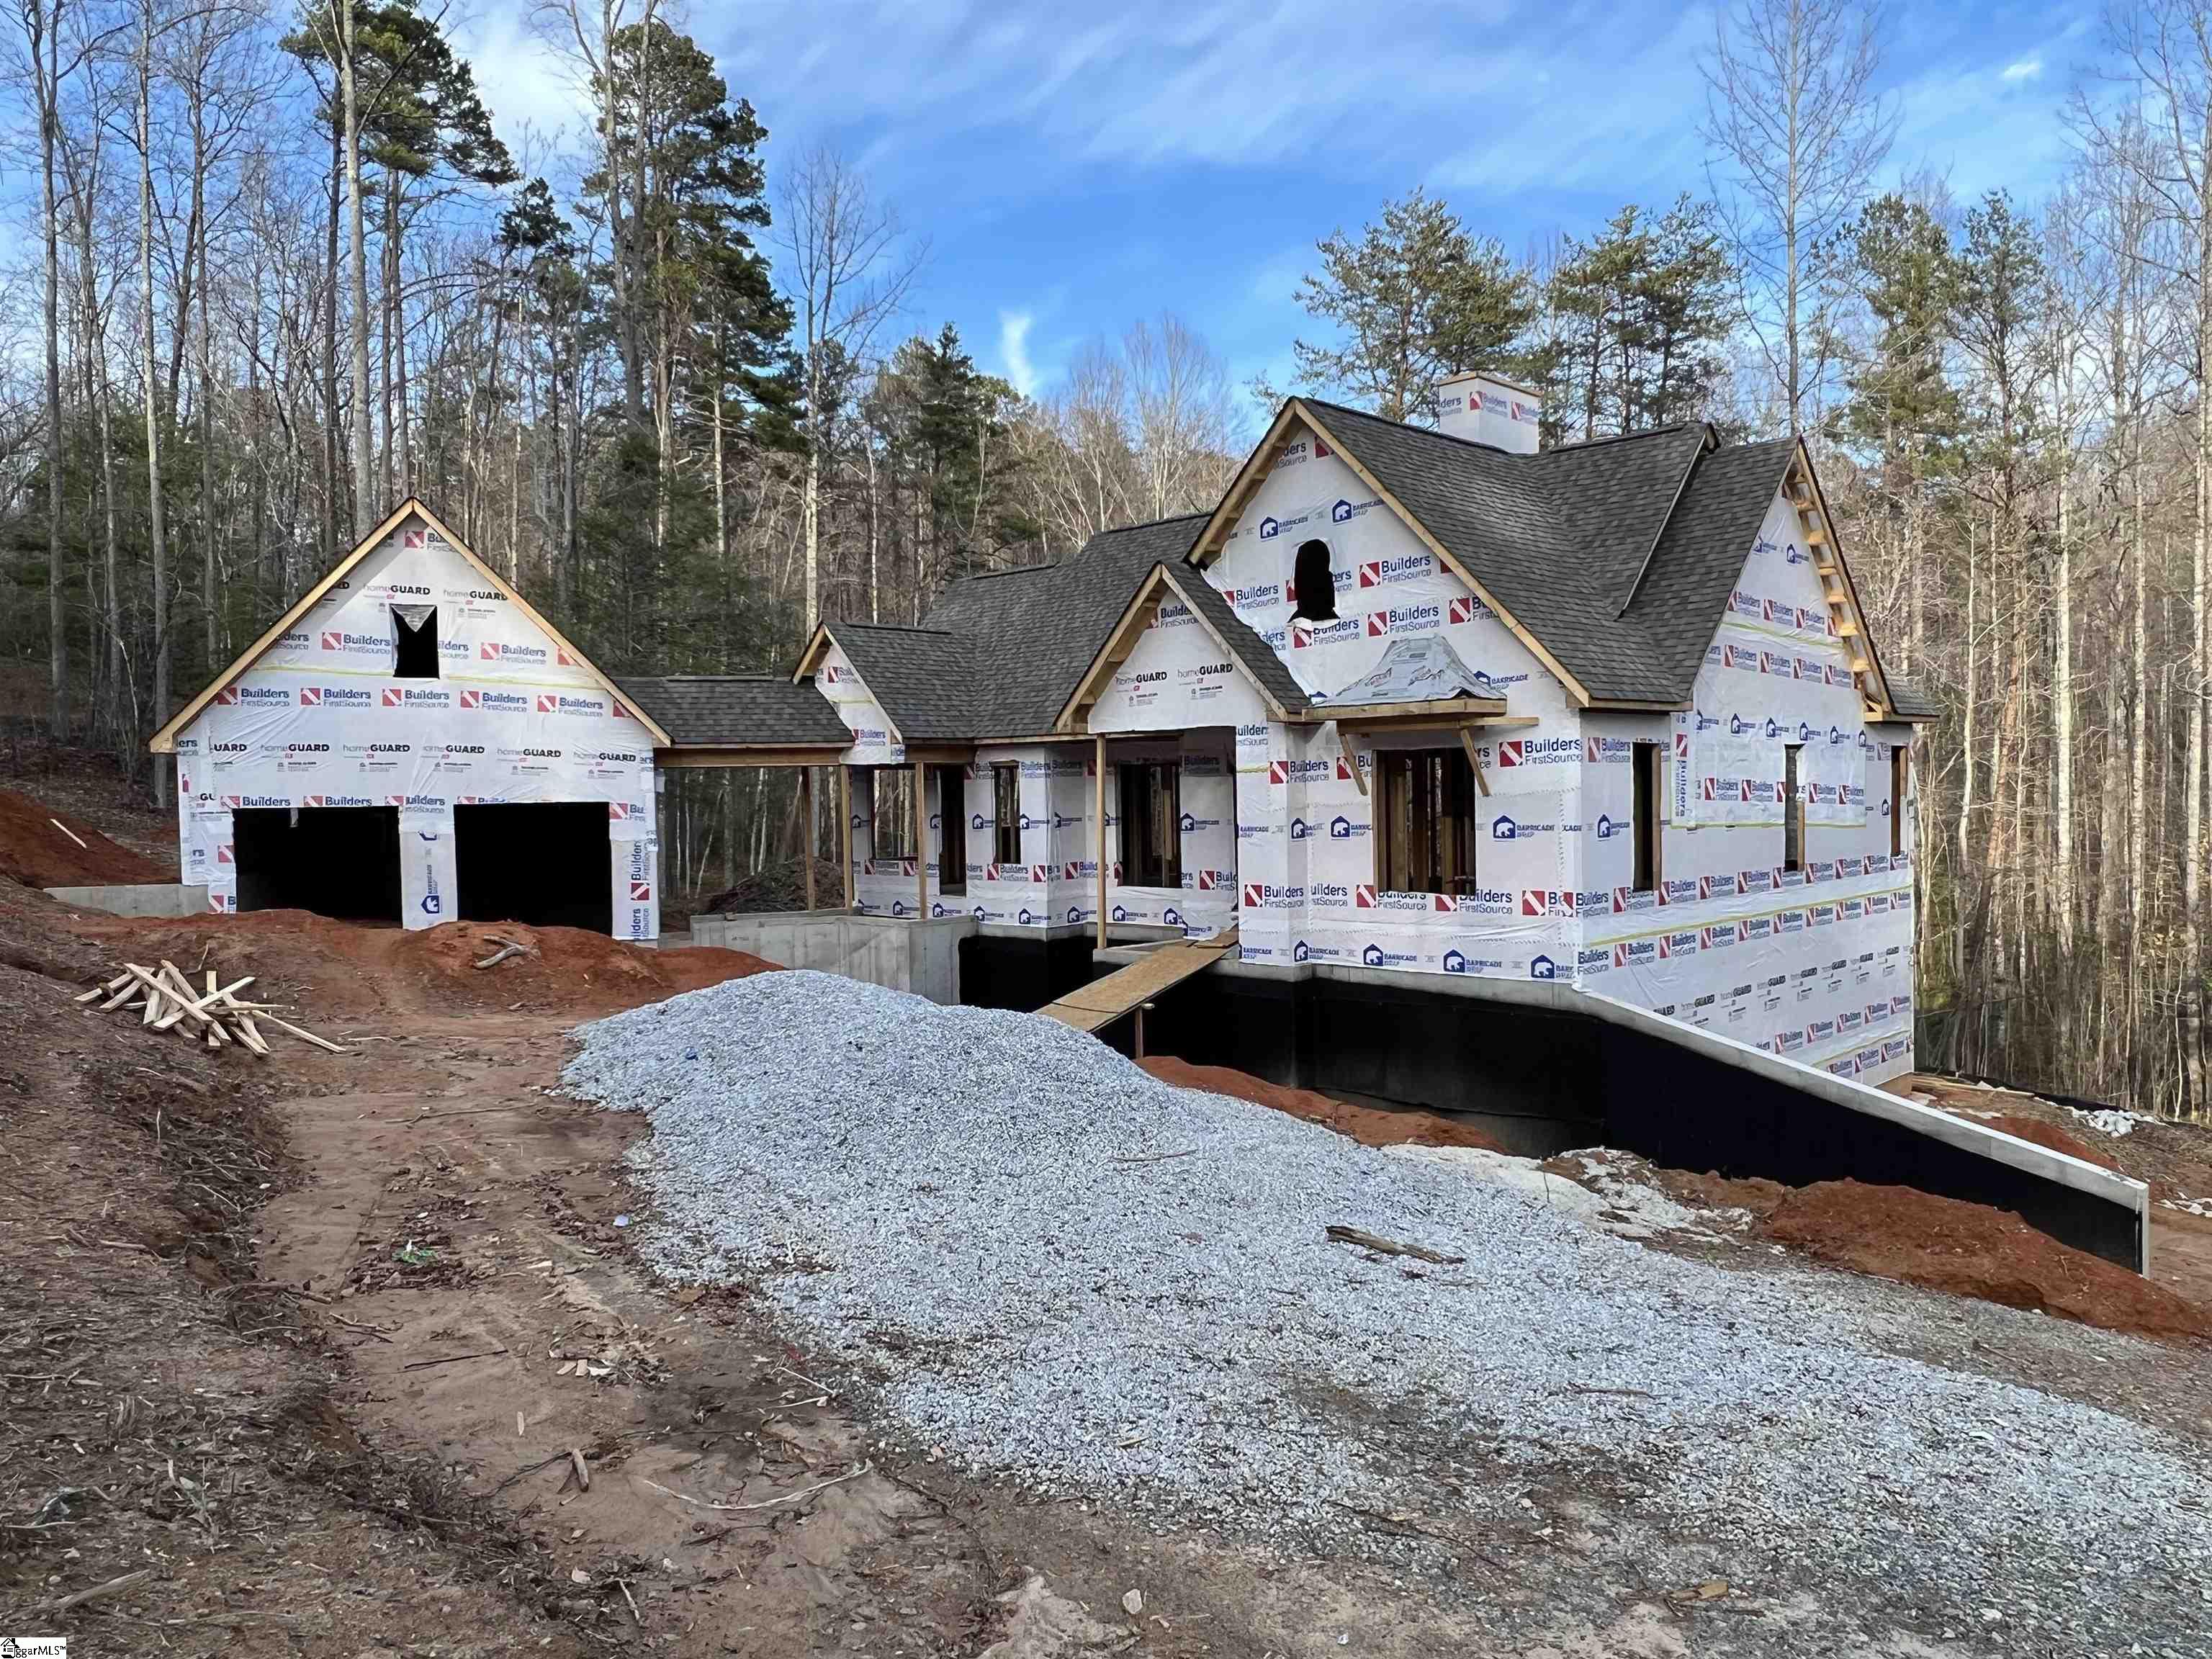 Enjoy true Luxury Living at the Cliffs at Mountain Park in this Beautiful, Brand New Donald Gardner designed home that will be ready for you to move in by the end of April, 2023! Great location only 15 minutes to Travelers Rest, SC & 15 minutes to Hendersonville, NC. Property is located just off the main road on a nice private cul-de-sac only minutes from the Clubhouse. There is a creek at the back of the property and on the other side of the creek is one of the many walking trails throughout Mountain Park. This is a custom home being built by Bartron Builders. House plans are in documents. Home will feature an LG Appliance package with a Gas top Stove with Double Ovens. Home will also feature a back up Generator for convenience. A Cliffs Membership is available for Purchase. Don't miss out on this wonderful opportunity to get a brand new home!